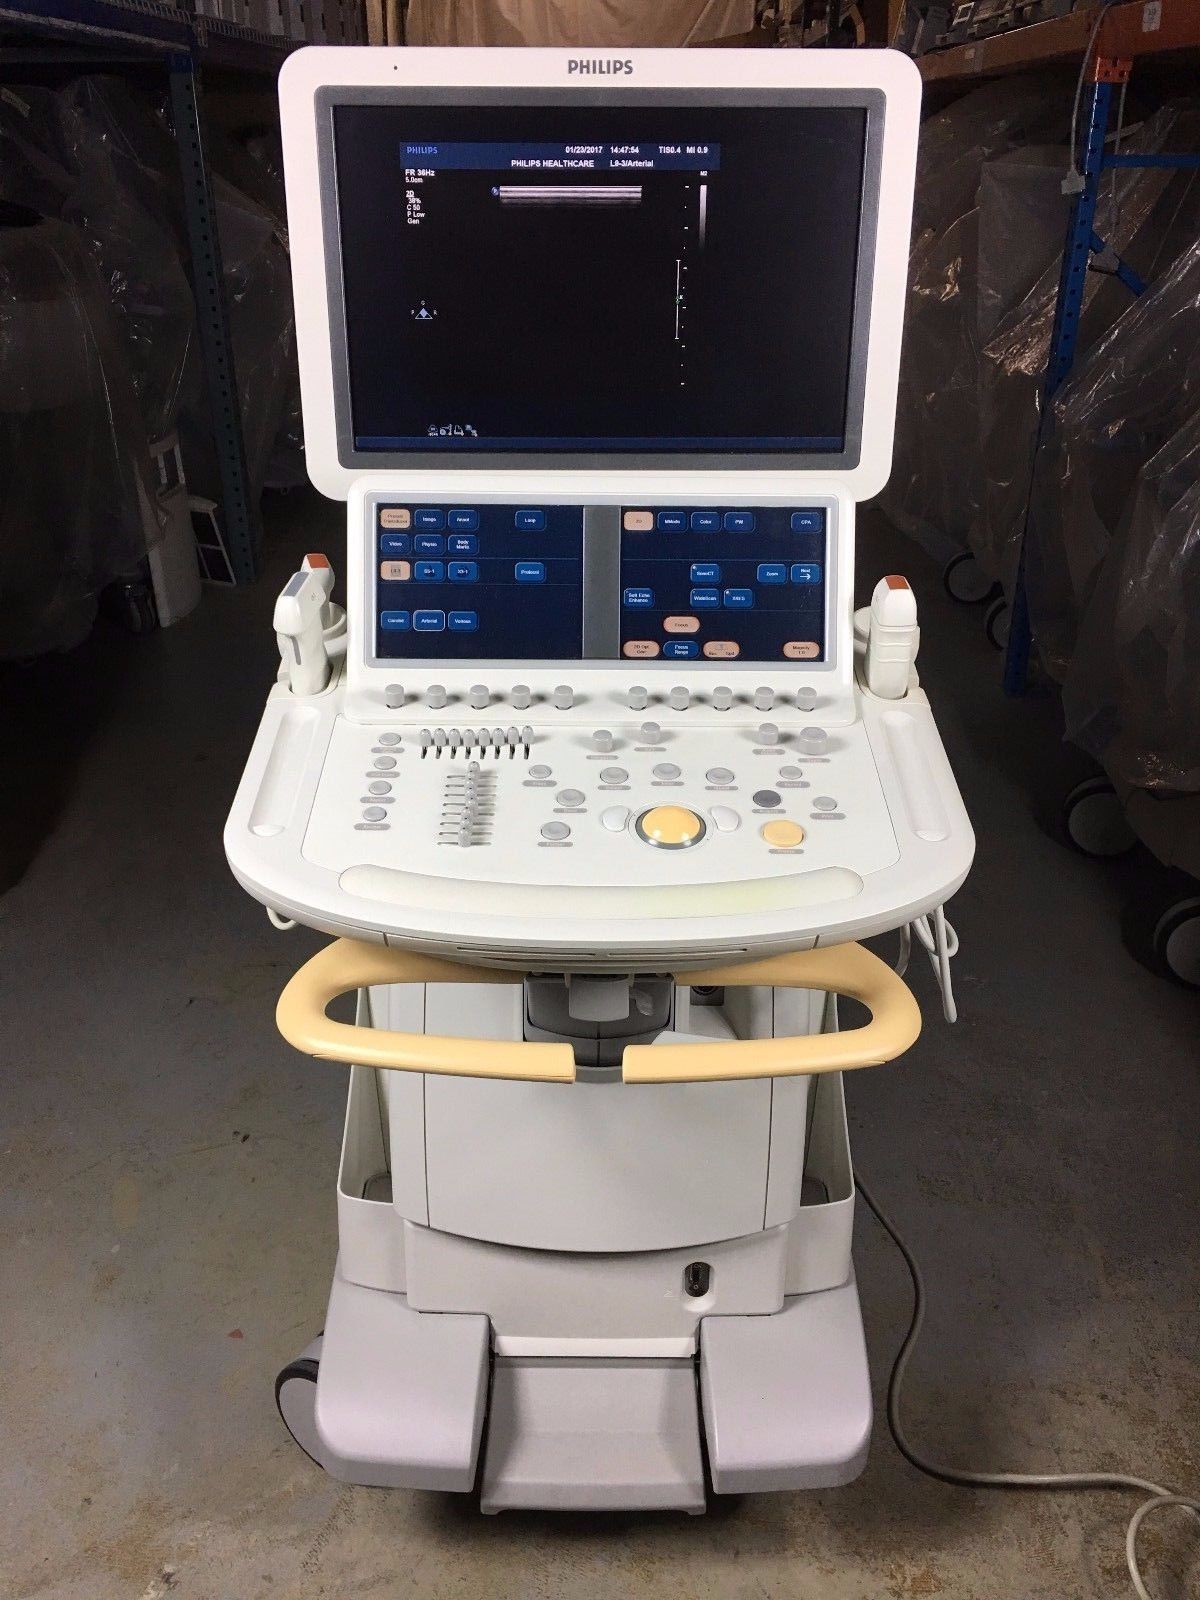 PHILIPS iE33 CART F ULTRASOUND  SYSTEM WITH X3-1, S5-1 & L9-3 TRANSDUCERS